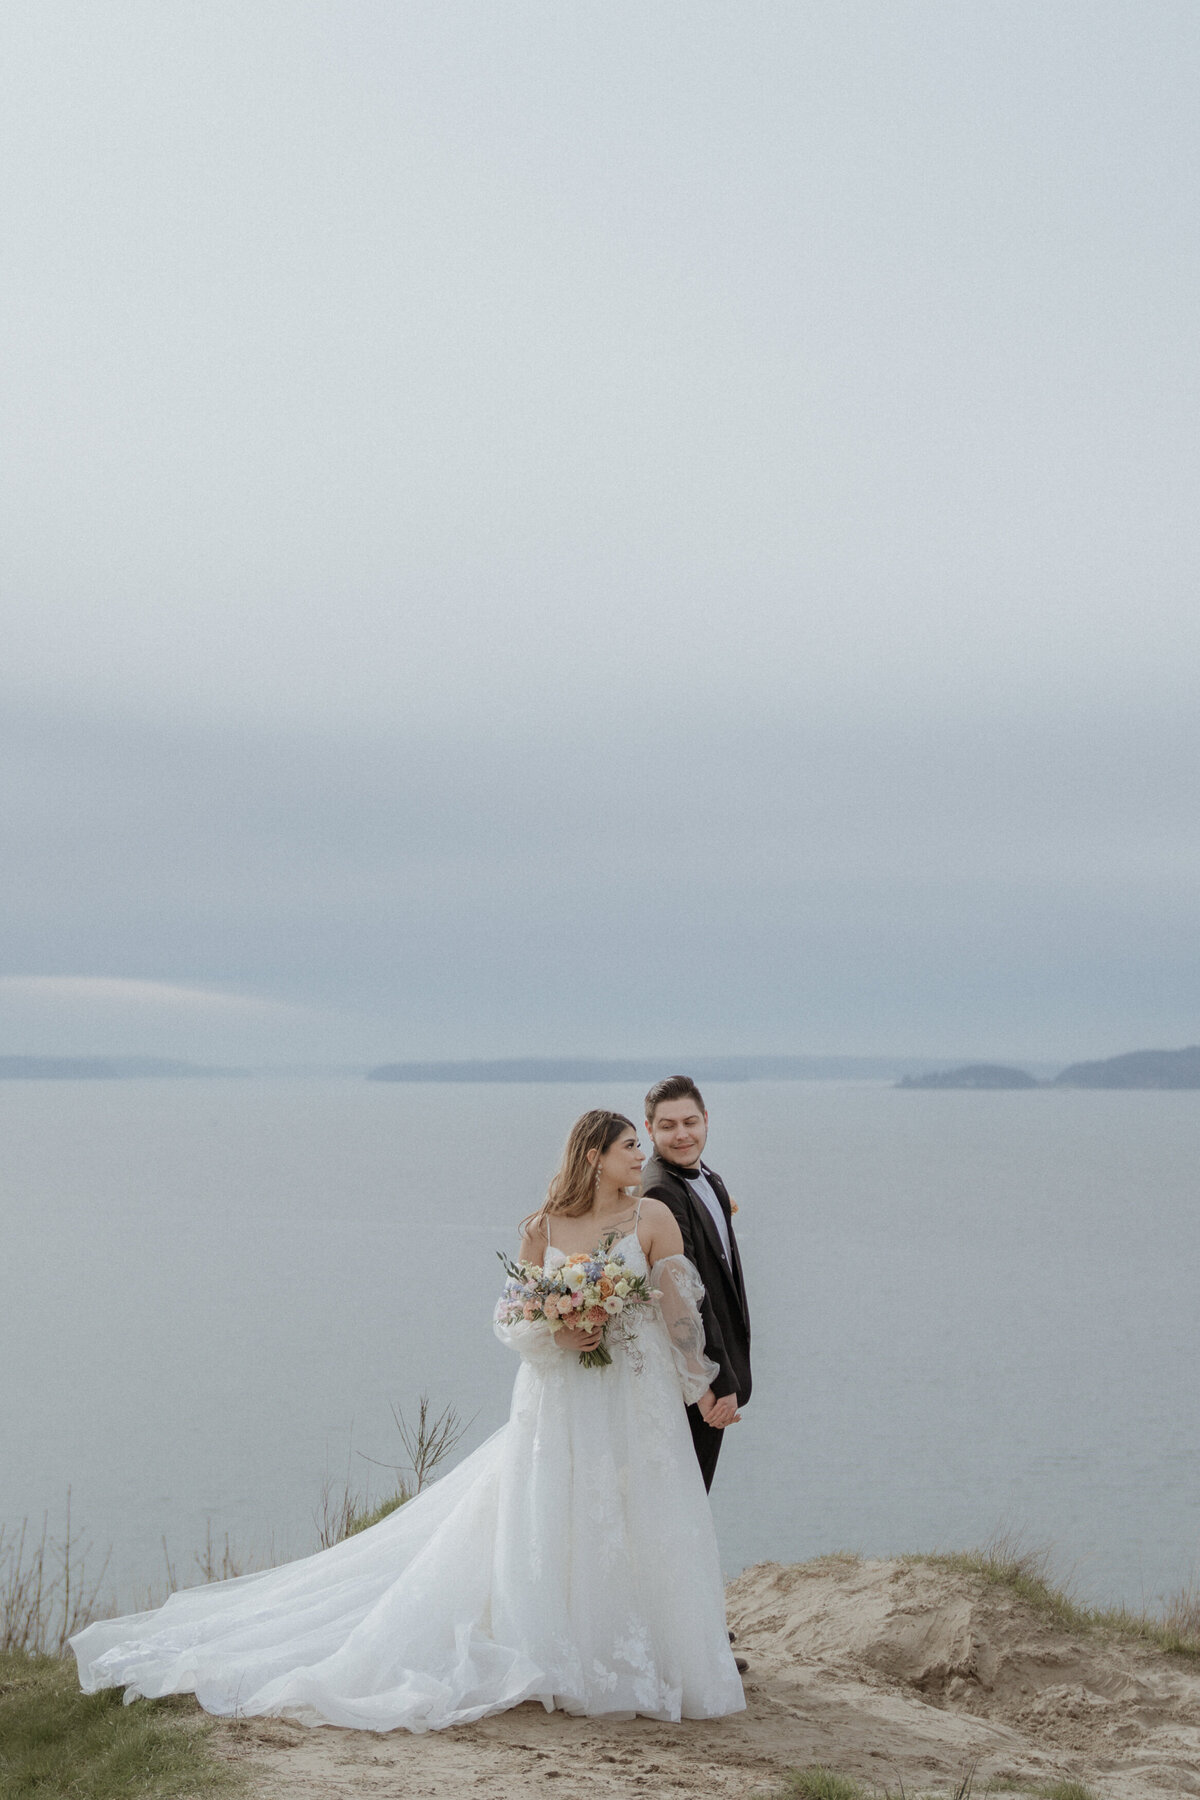 Cristal-Esteban-Elopement-at-Discovery-Park-in-Seattle-Amy-Law-Photography-20